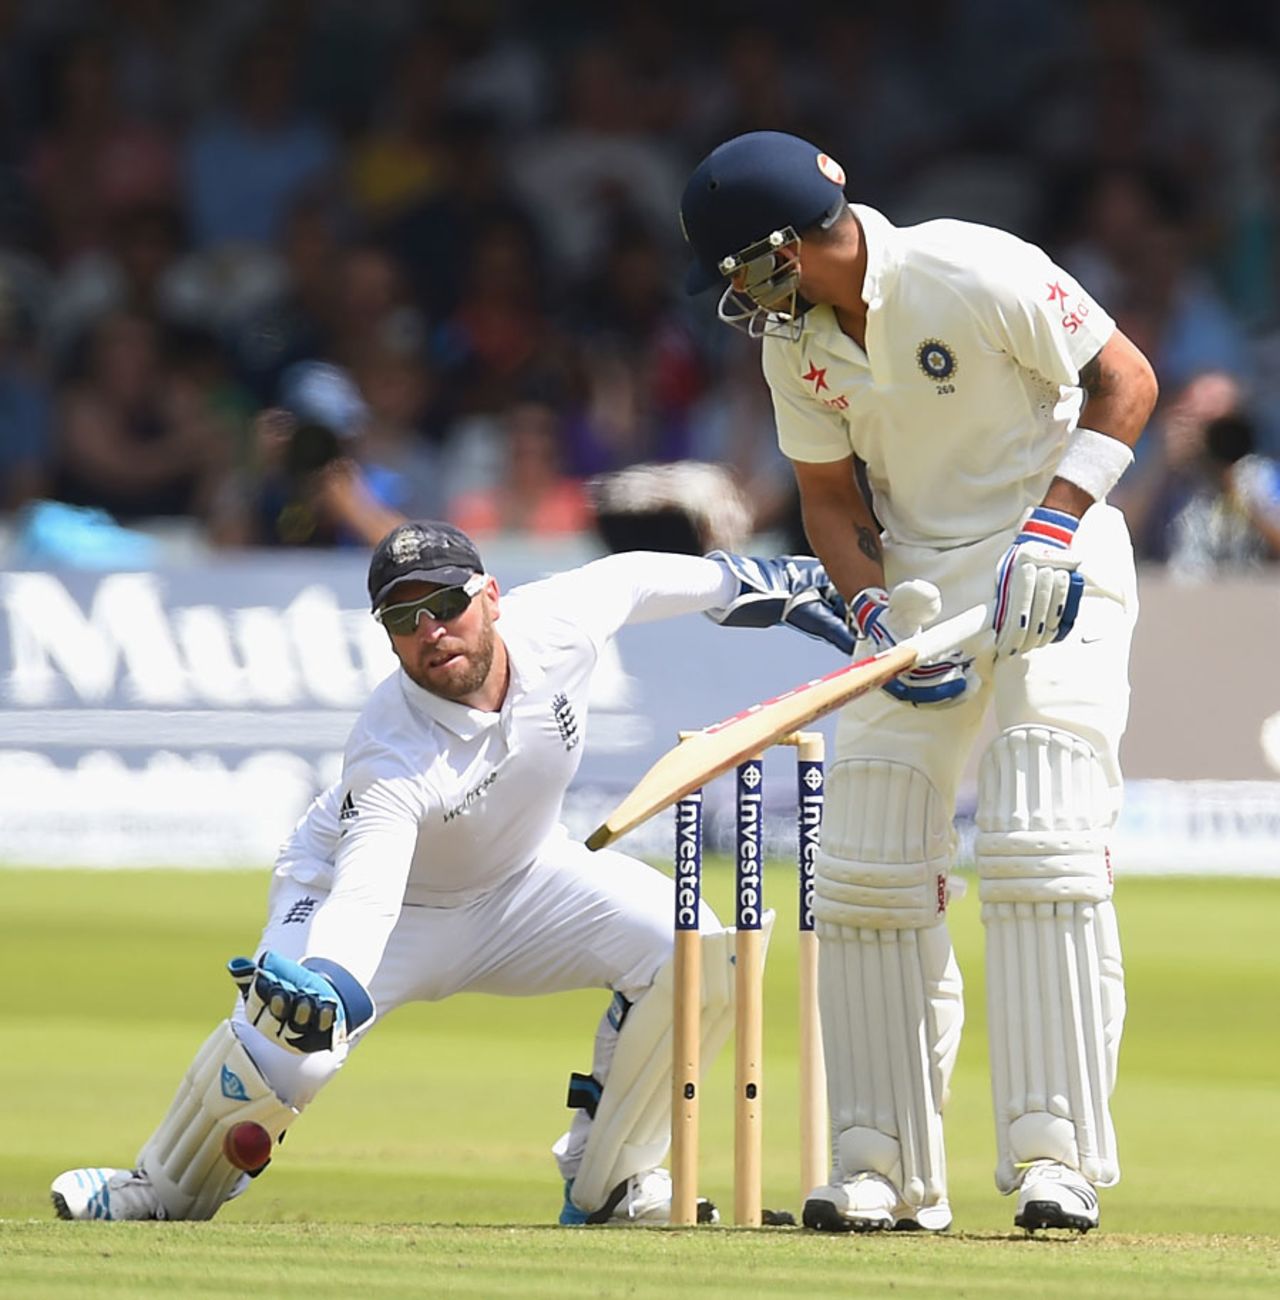 Matt Prior dropped Virat Kohli off the last ball before lunch, England v India, 2nd Investec Test, Lord's, 1st day, July 17, 2014